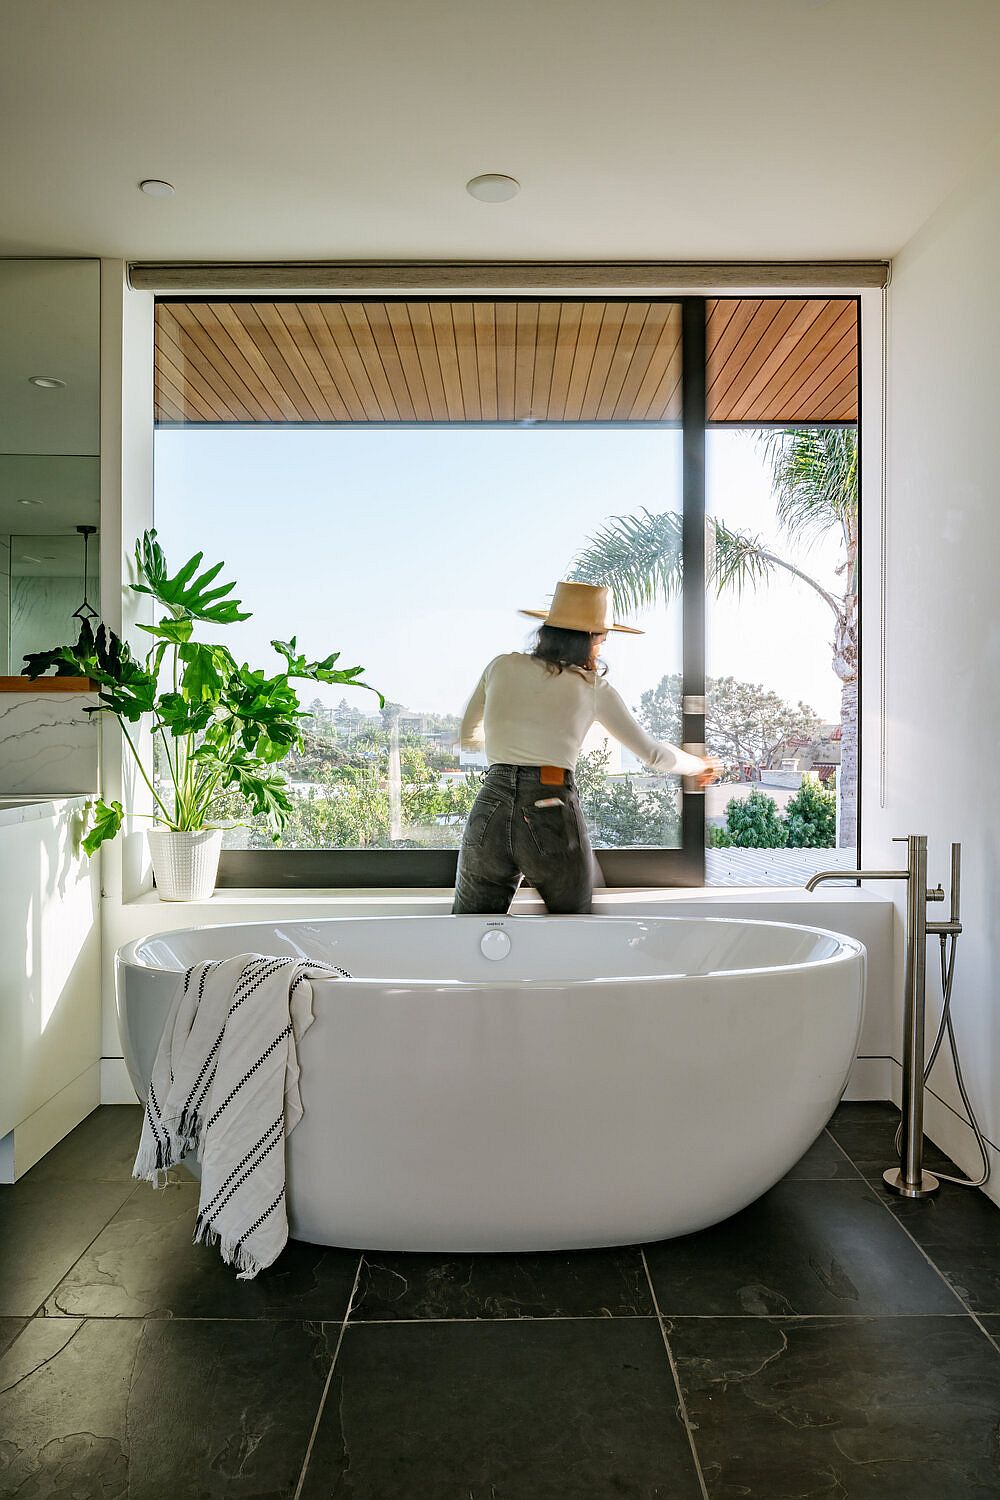 Large-freeestanding-bathtub-in-white-is-the-focal-point-of-the-spacious-modern-bathroom-86110